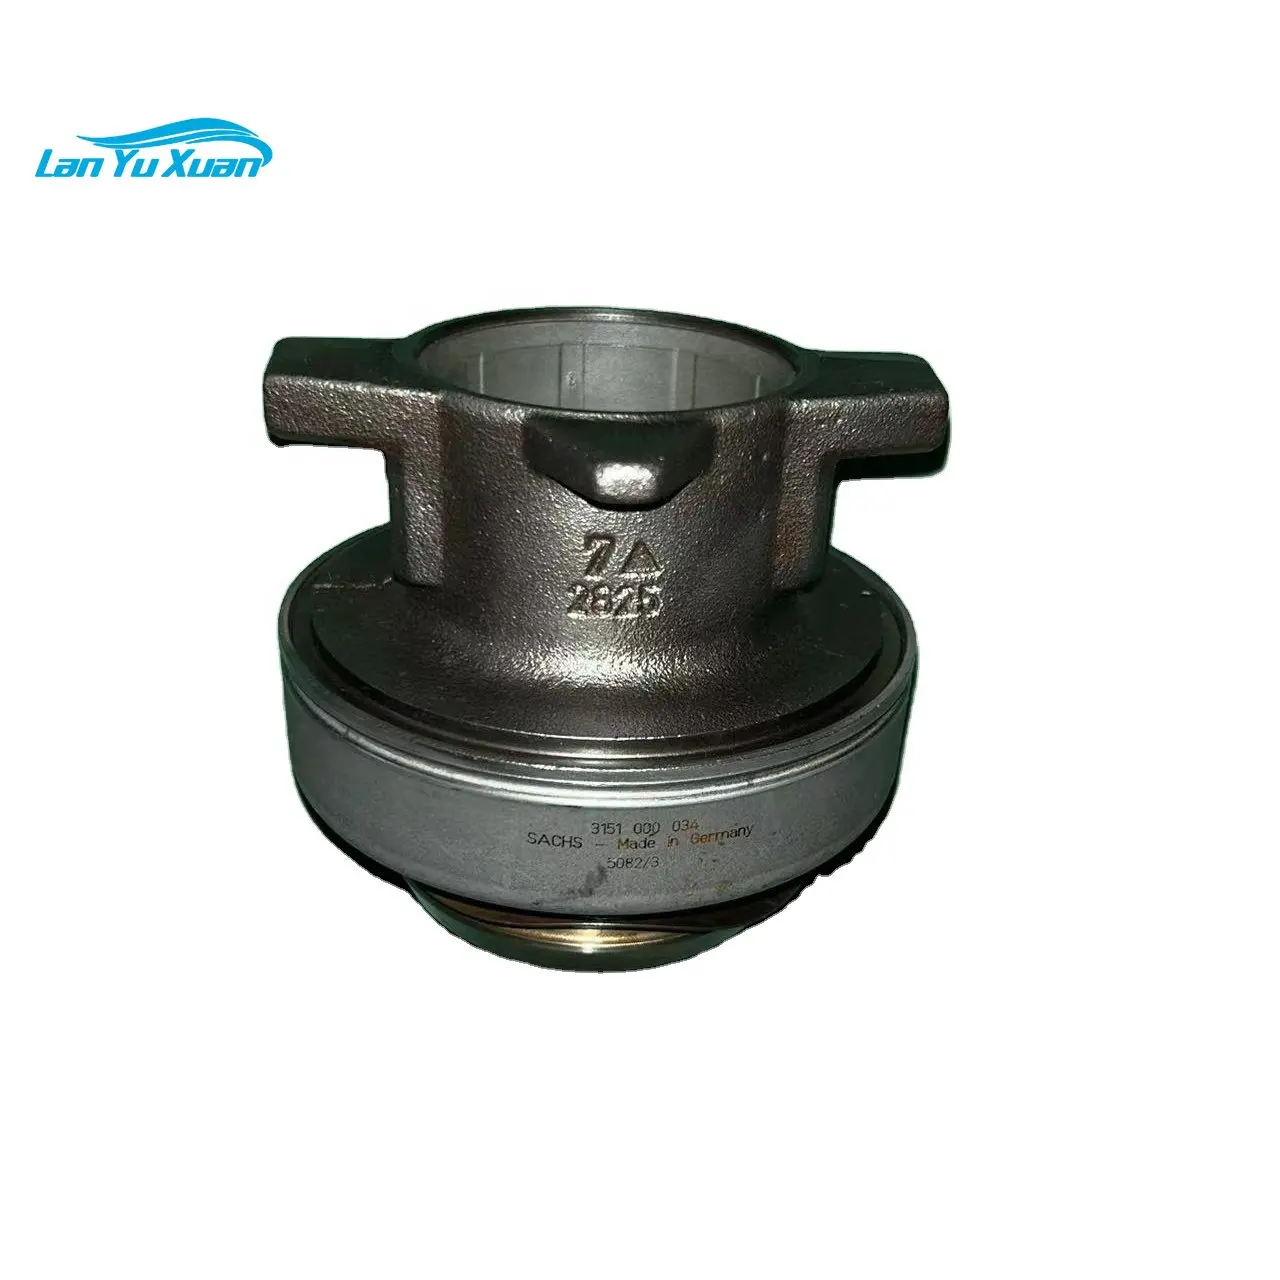 SACHS 3151000034 81.30000-6587 81.30000-6600 81.30550-0063 1250710 1303975 1362752 Clutch Release Bearing automobile clutch central release bearing slave cylinder for peugeot lancer 2324a080